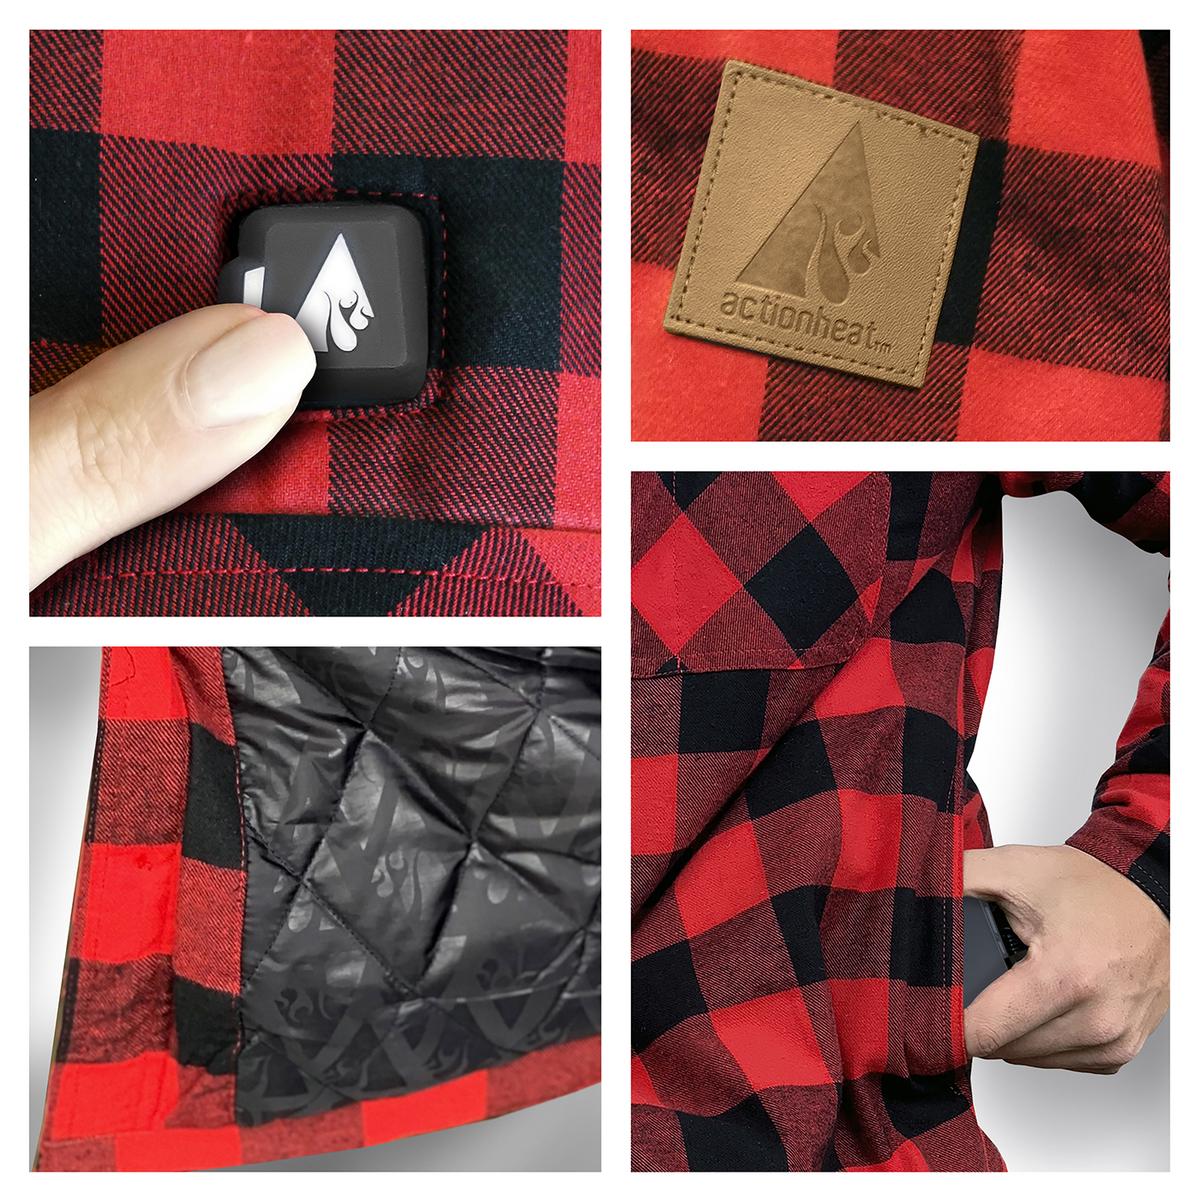 ActionHeat 5V Battery Heated Flannel Shirt - Right